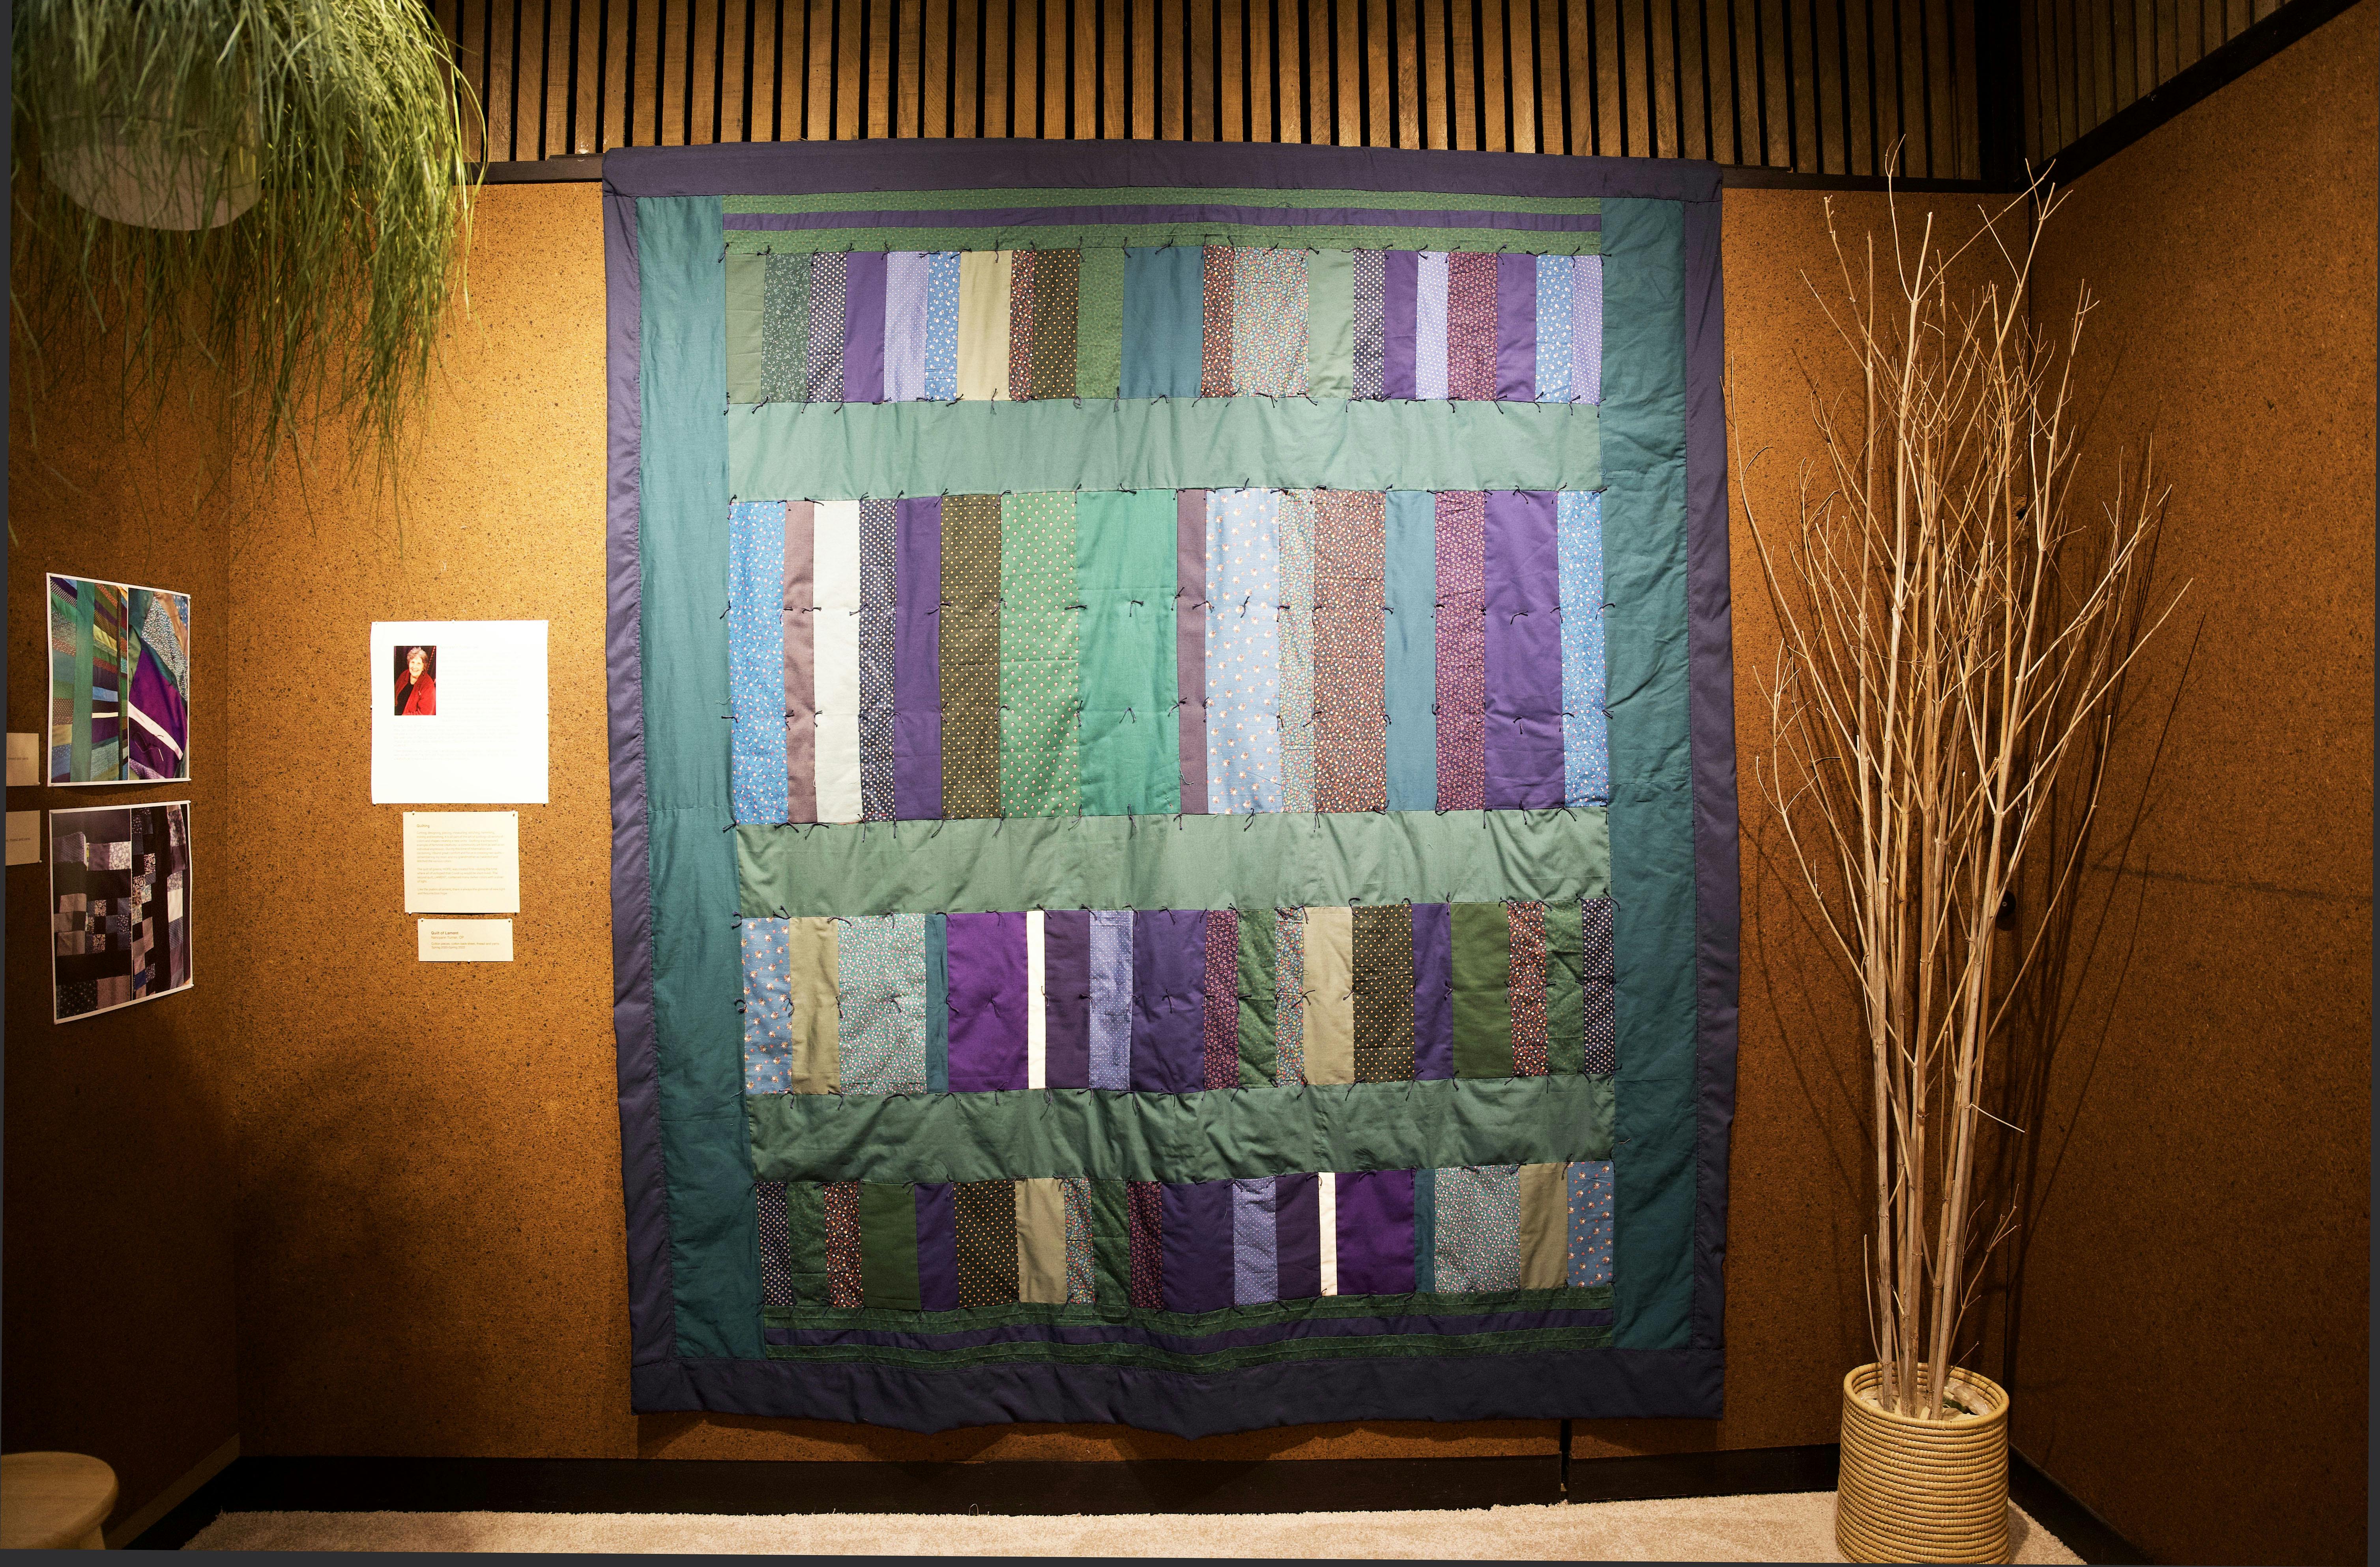 Through quilting, Sr. Turner said, she was able to take the diversity of colors and shapes to create a new unity.